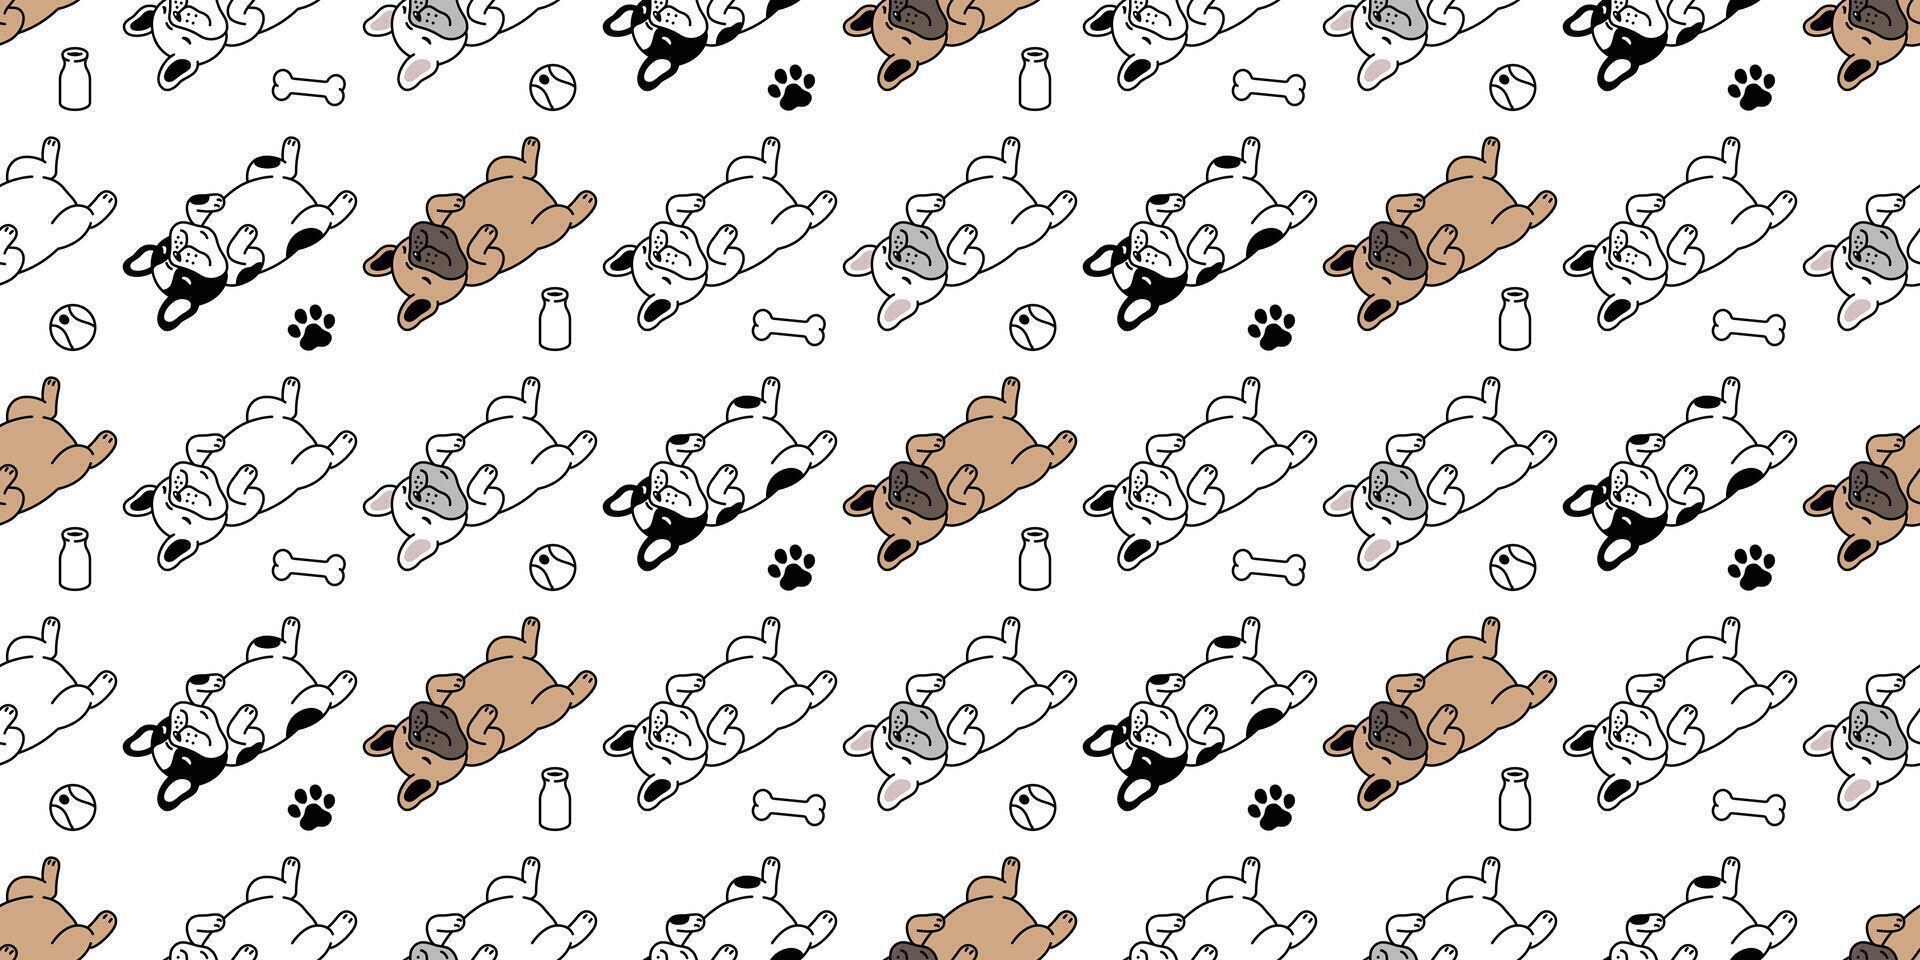 dog seamless pattern french bulldog vector sleeping pet puppy animal toy footprint paw bone ball scarf isolated repeat wallpaper tile background cartoon doodle illustration design